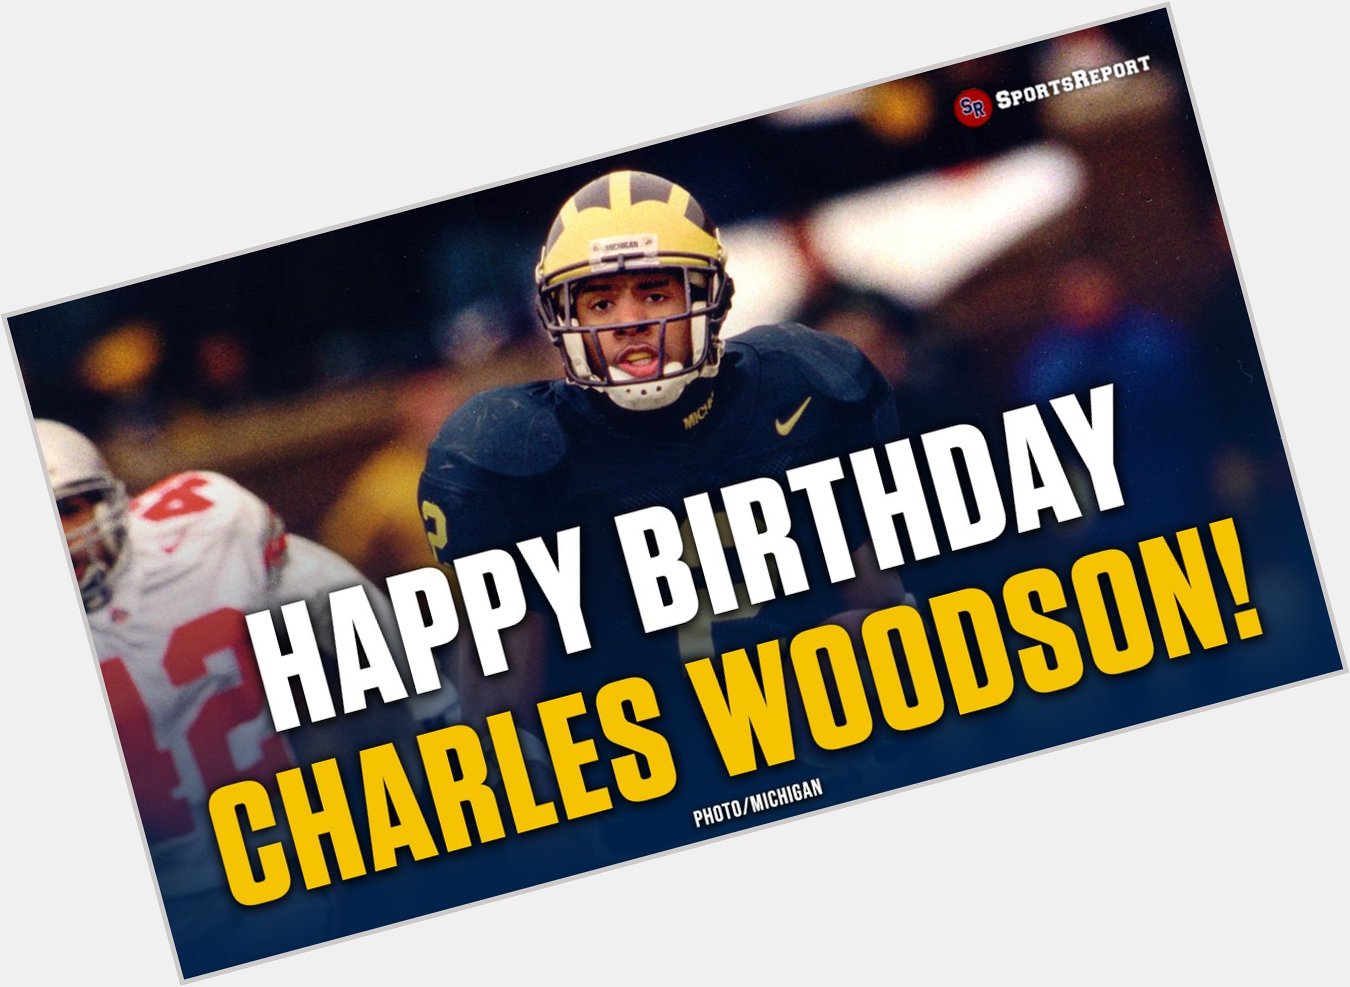  Fans, let\s wish legend Charles Woodson a Happy Birthday! 